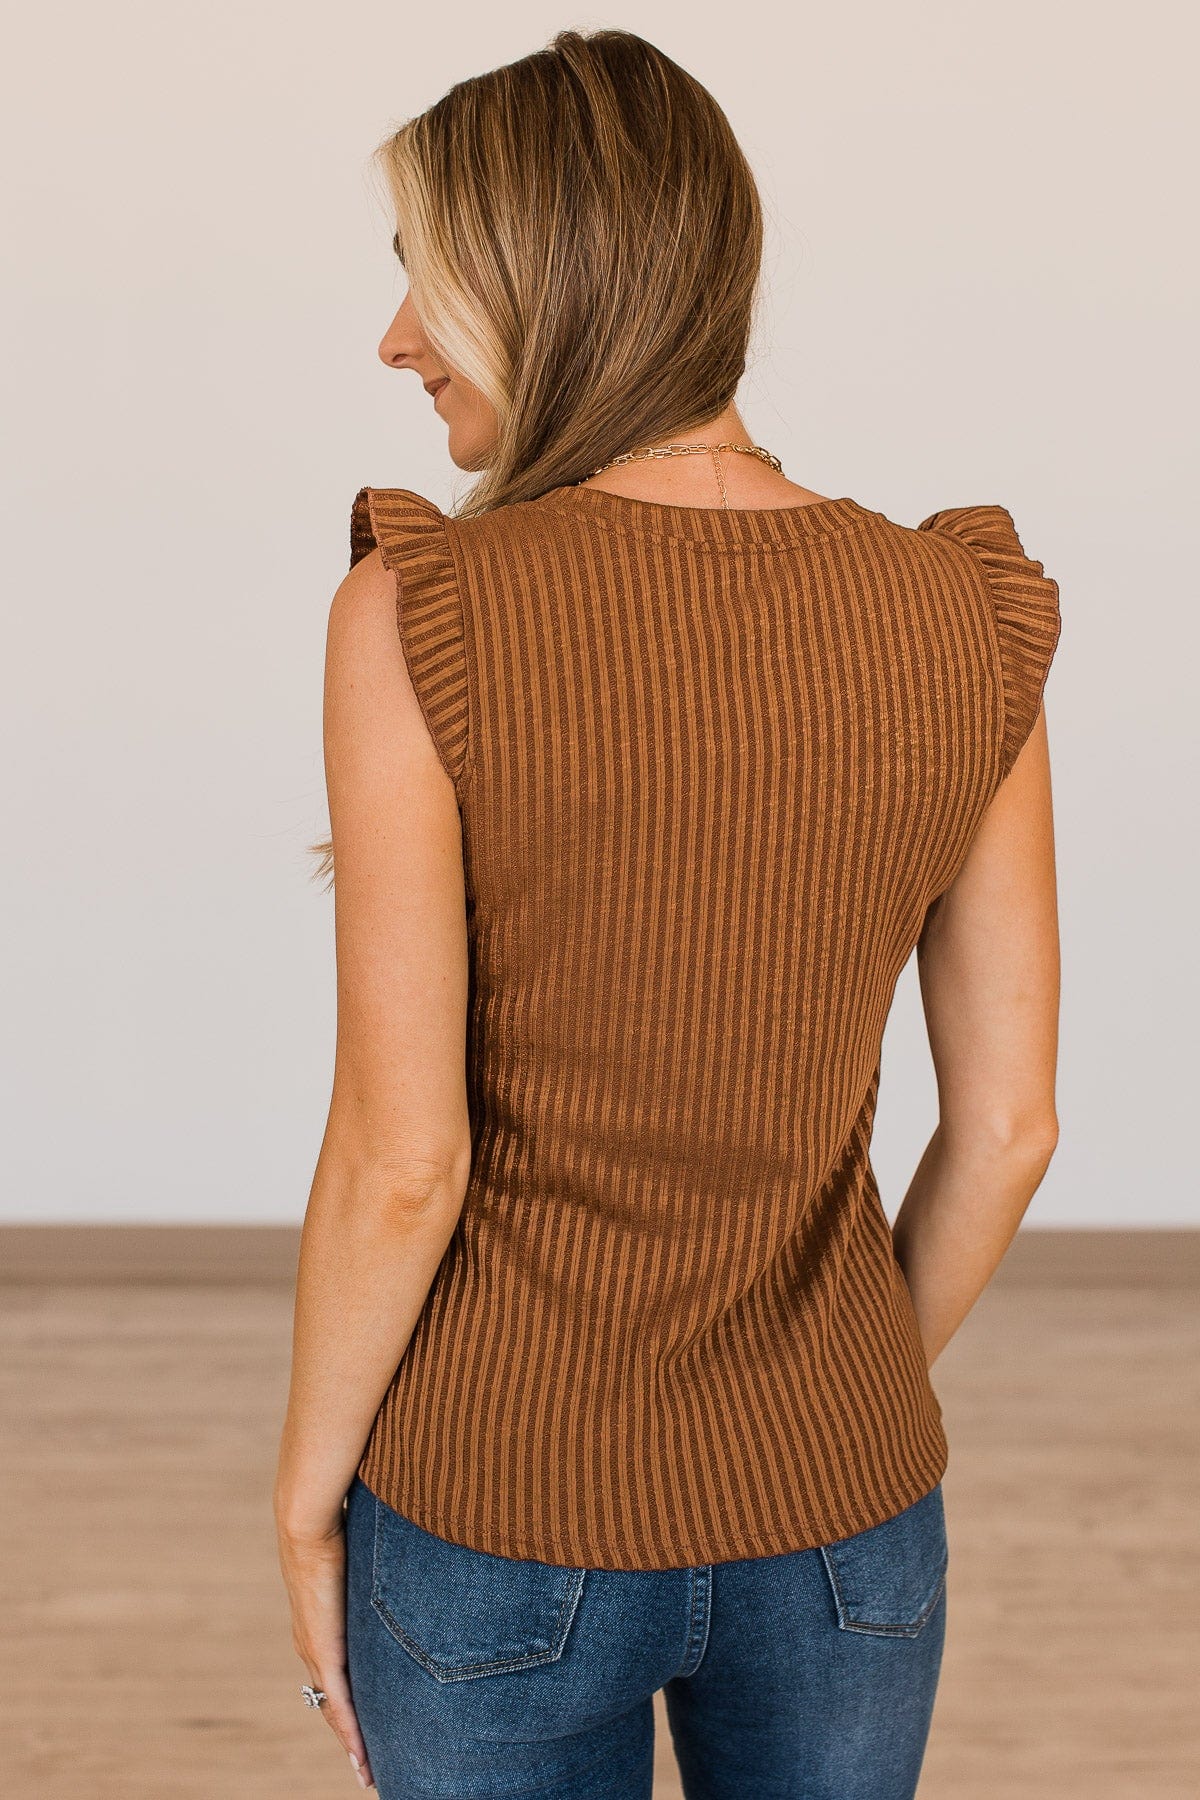 Late Night Romance Ribbed Top- Brown